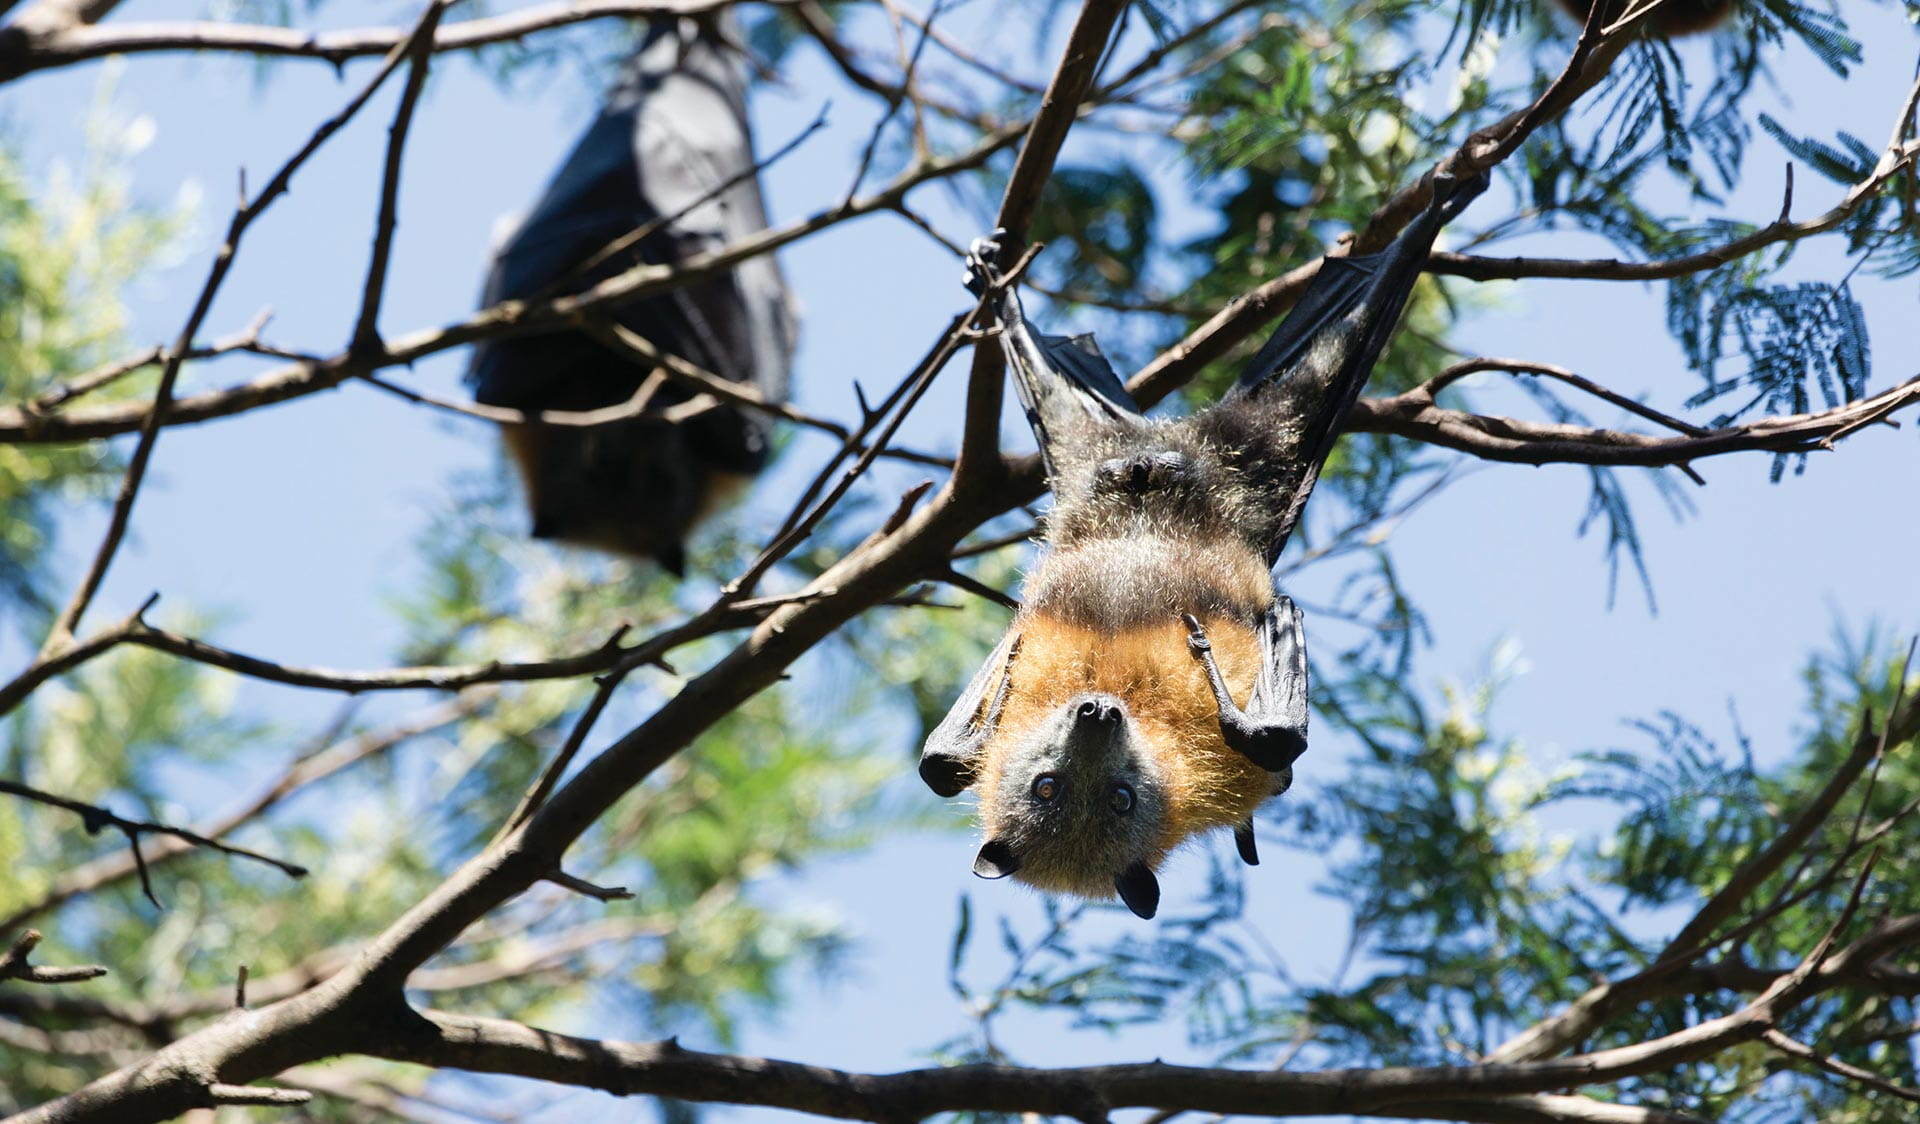 Up close and personal with a Grey Headed Flying Fox in Yarra Bend Park.